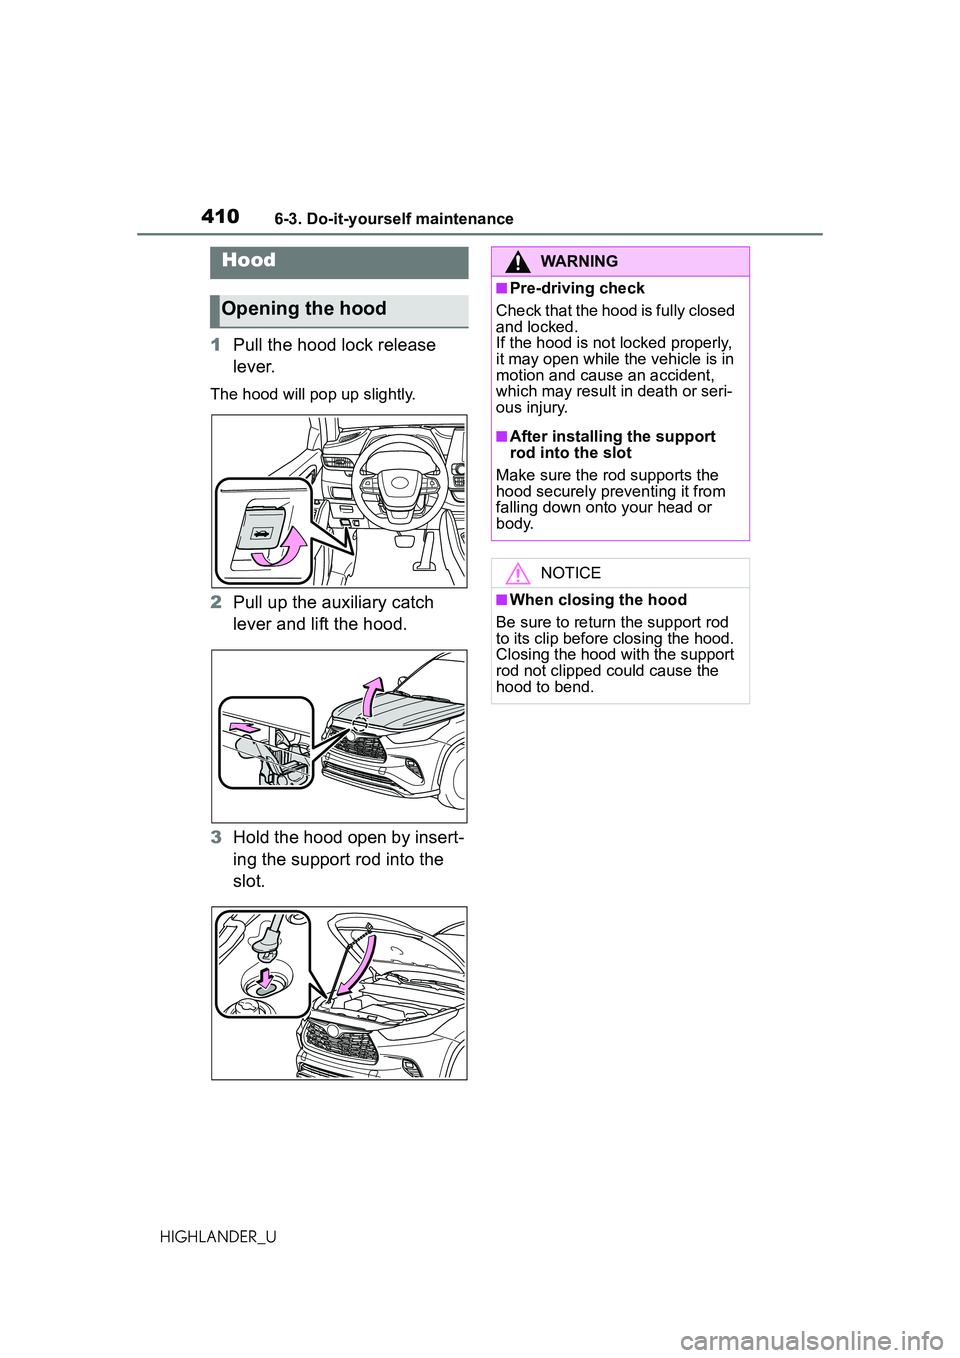 TOYOTA HIGHLANDER 2021  Owners Manual (in English) 4106-3. Do-it-yourself maintenance
HIGHLANDER_U
1Pull the hood lock release 
lever.
The hood will pop up slightly.
2Pull up the auxiliary catch 
lever and lift the hood.
3 Hold the hood open by insert